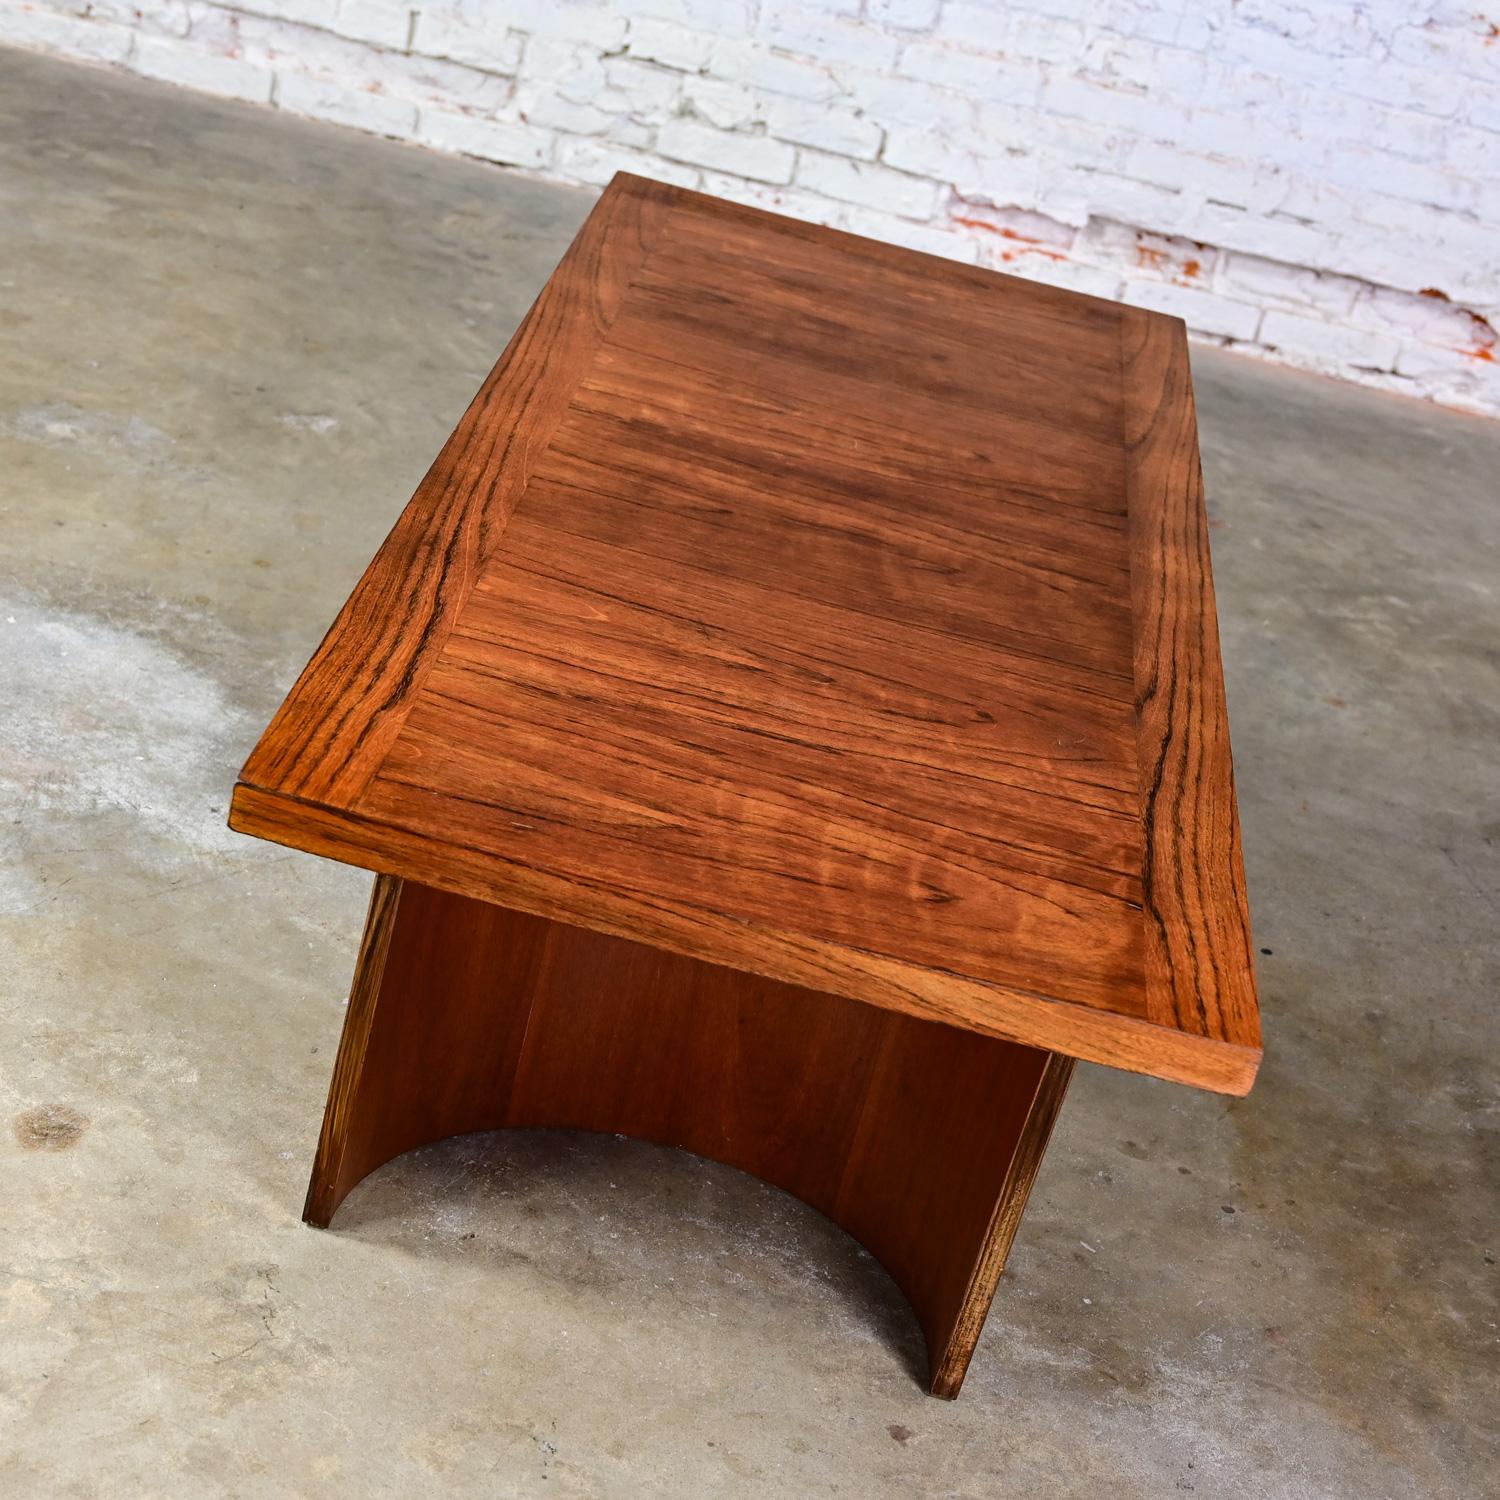 1970’s Modern Coffee Table Kroehler Rectangle Top Bentwood Curved Double U Base For Sale 3